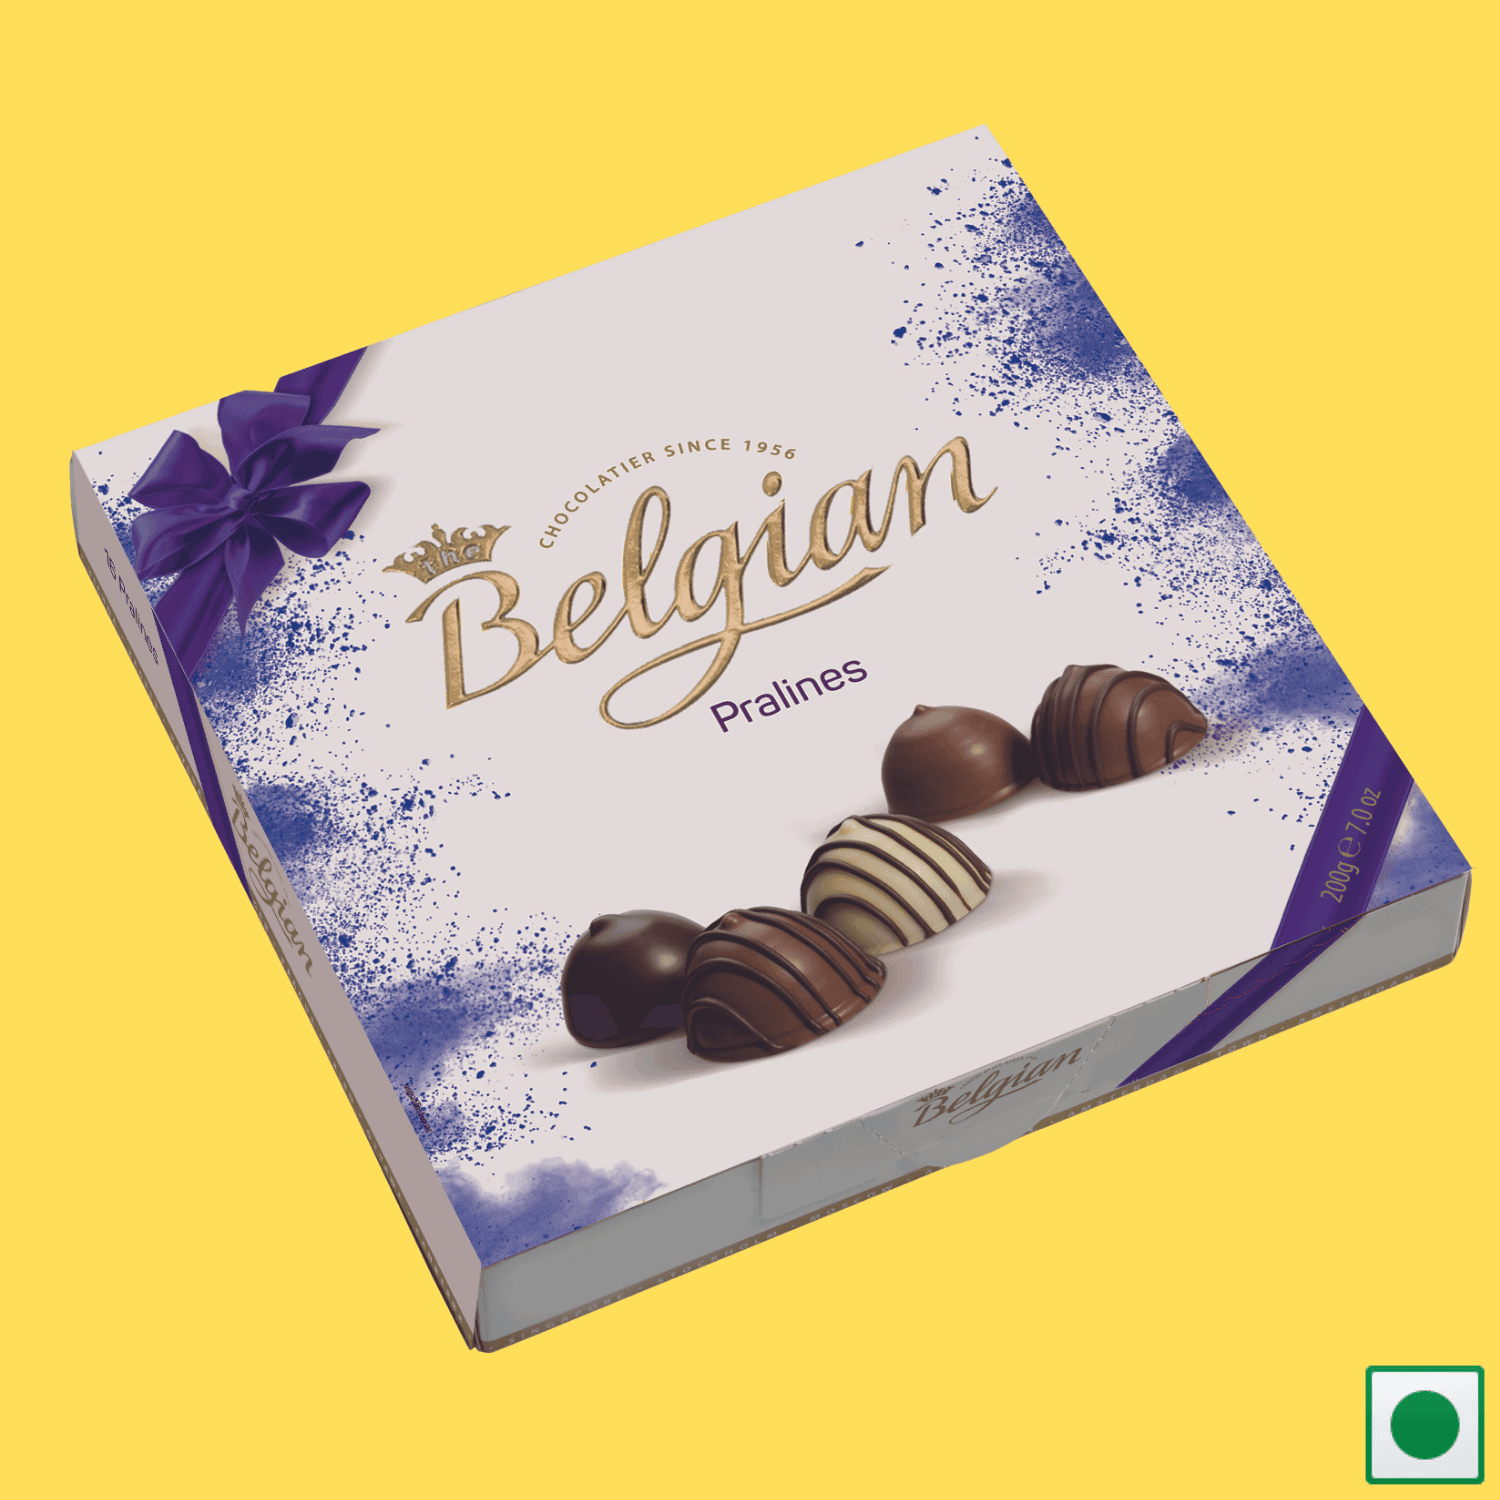 The Belgian Assorted Pralines, 200g (Imported) - Super 7 Mart